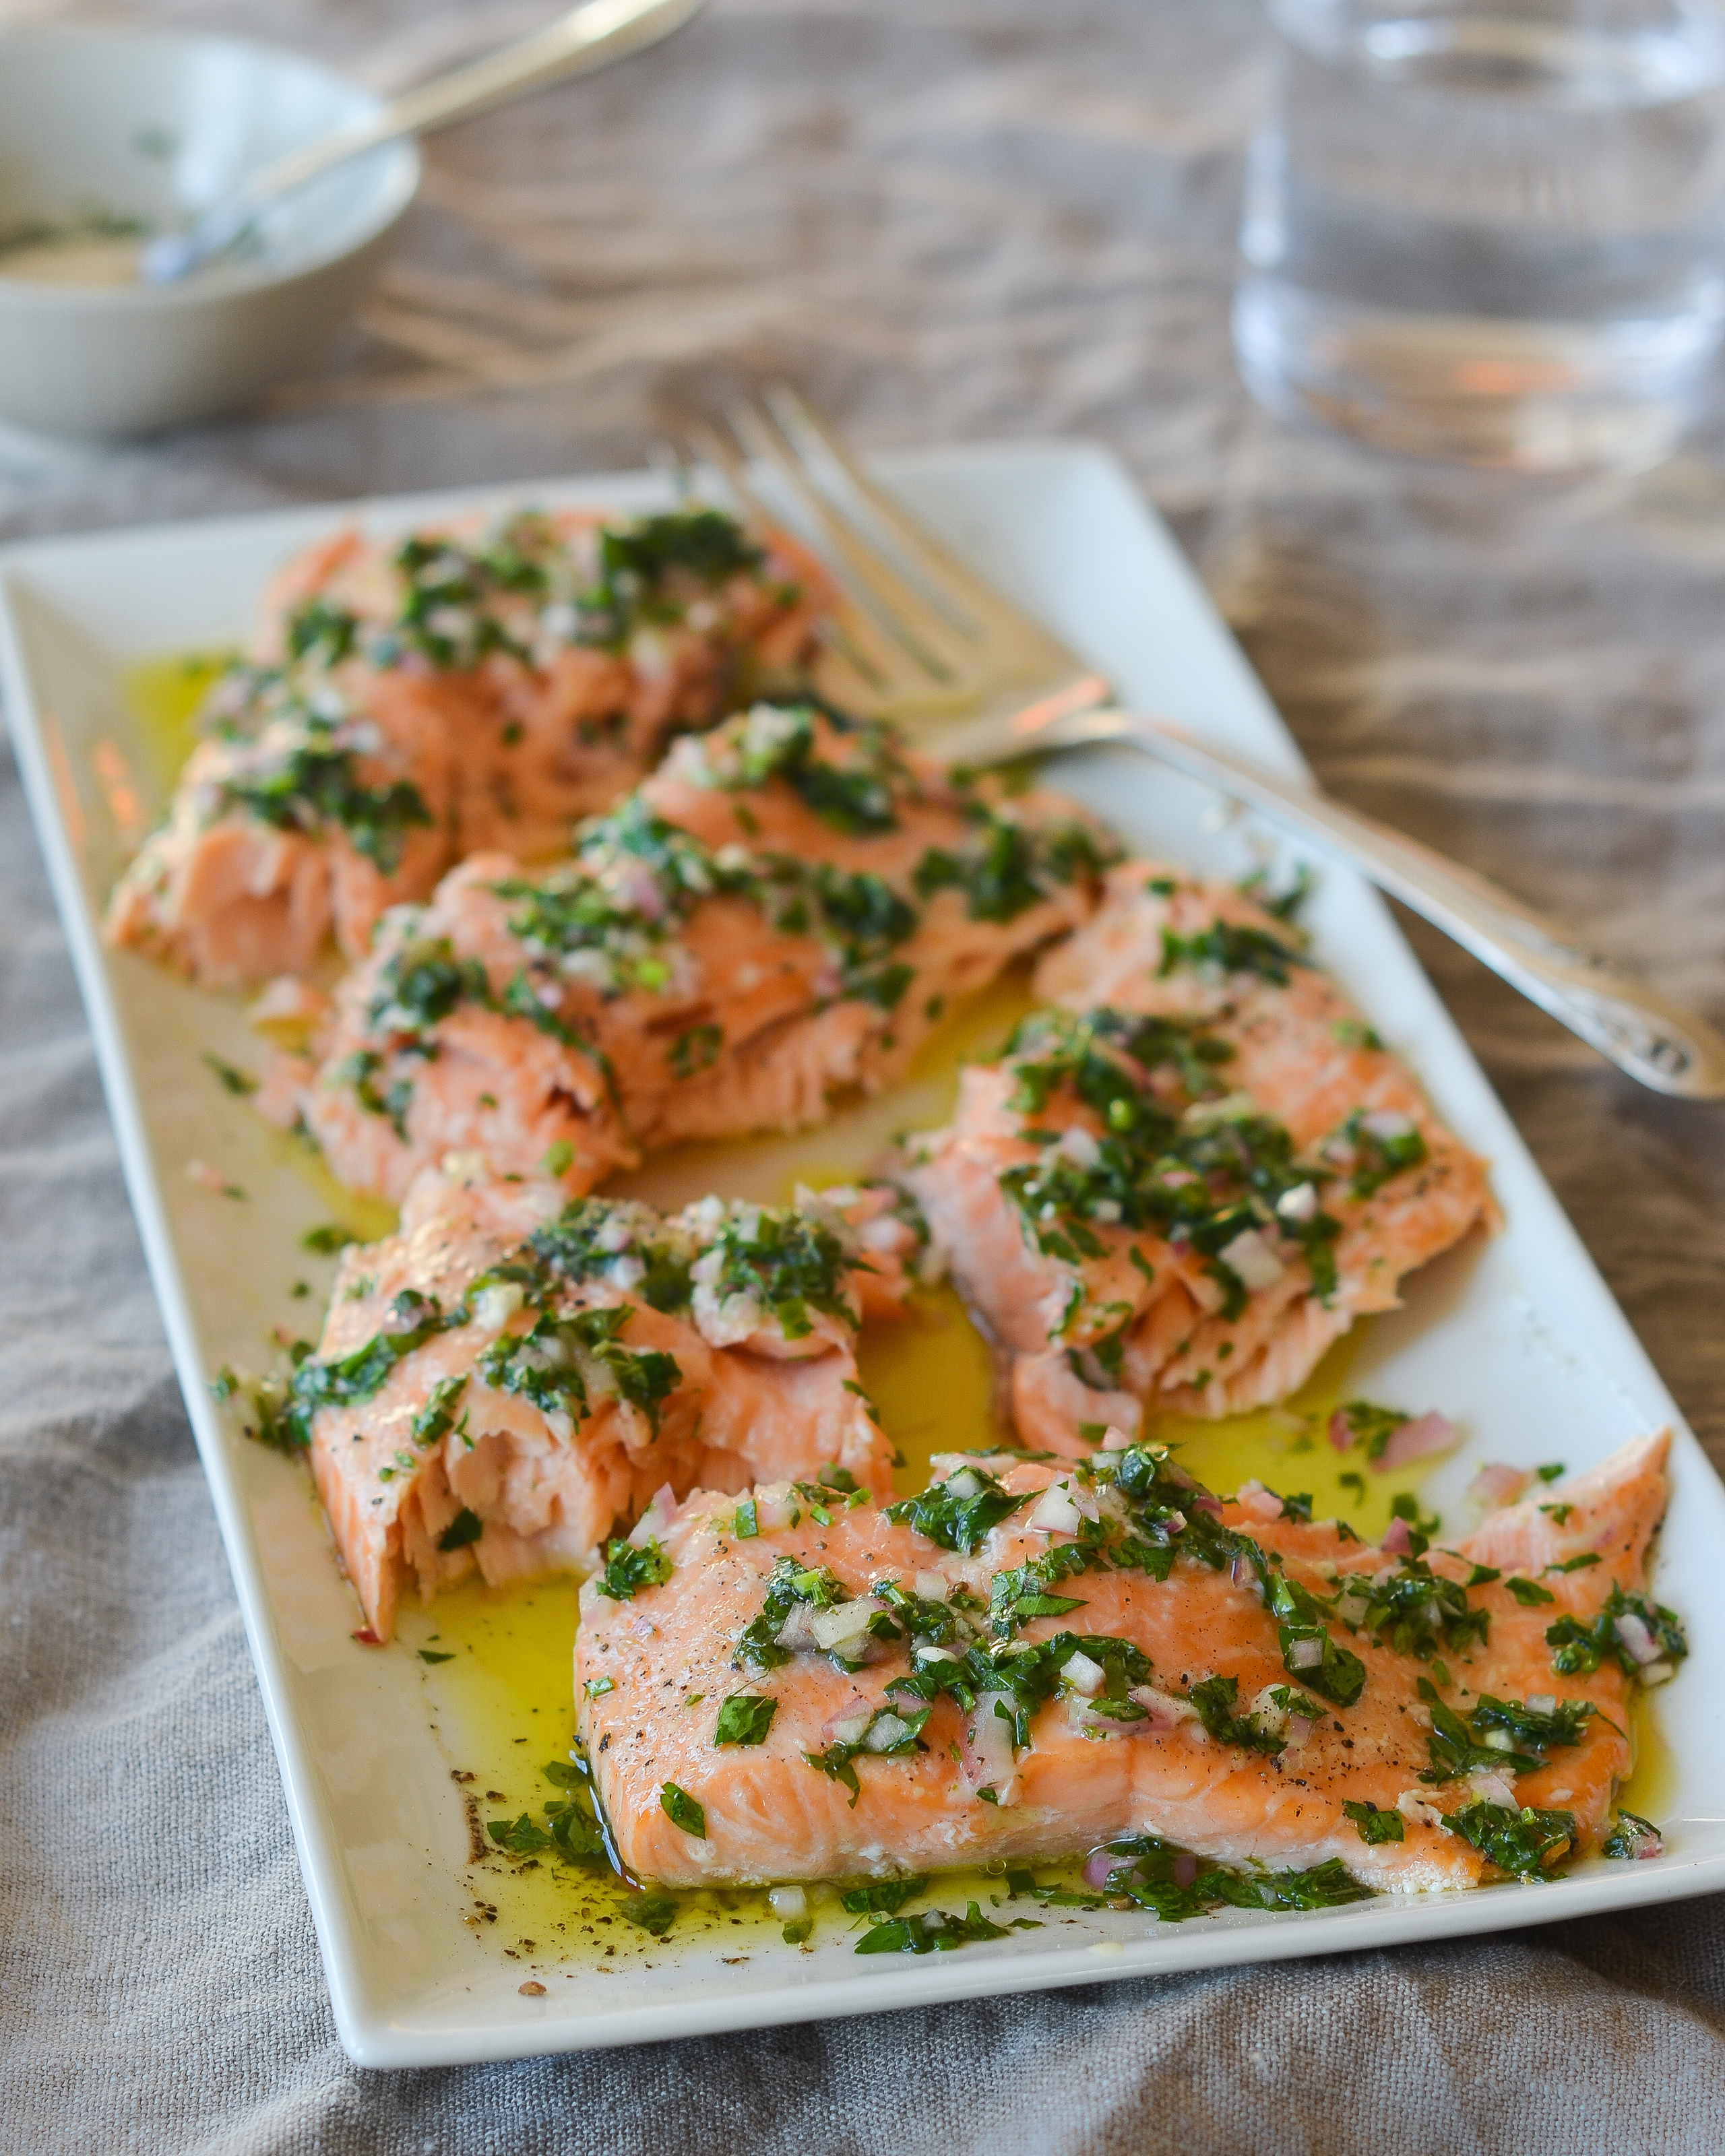 Wild salmon culinary traditions